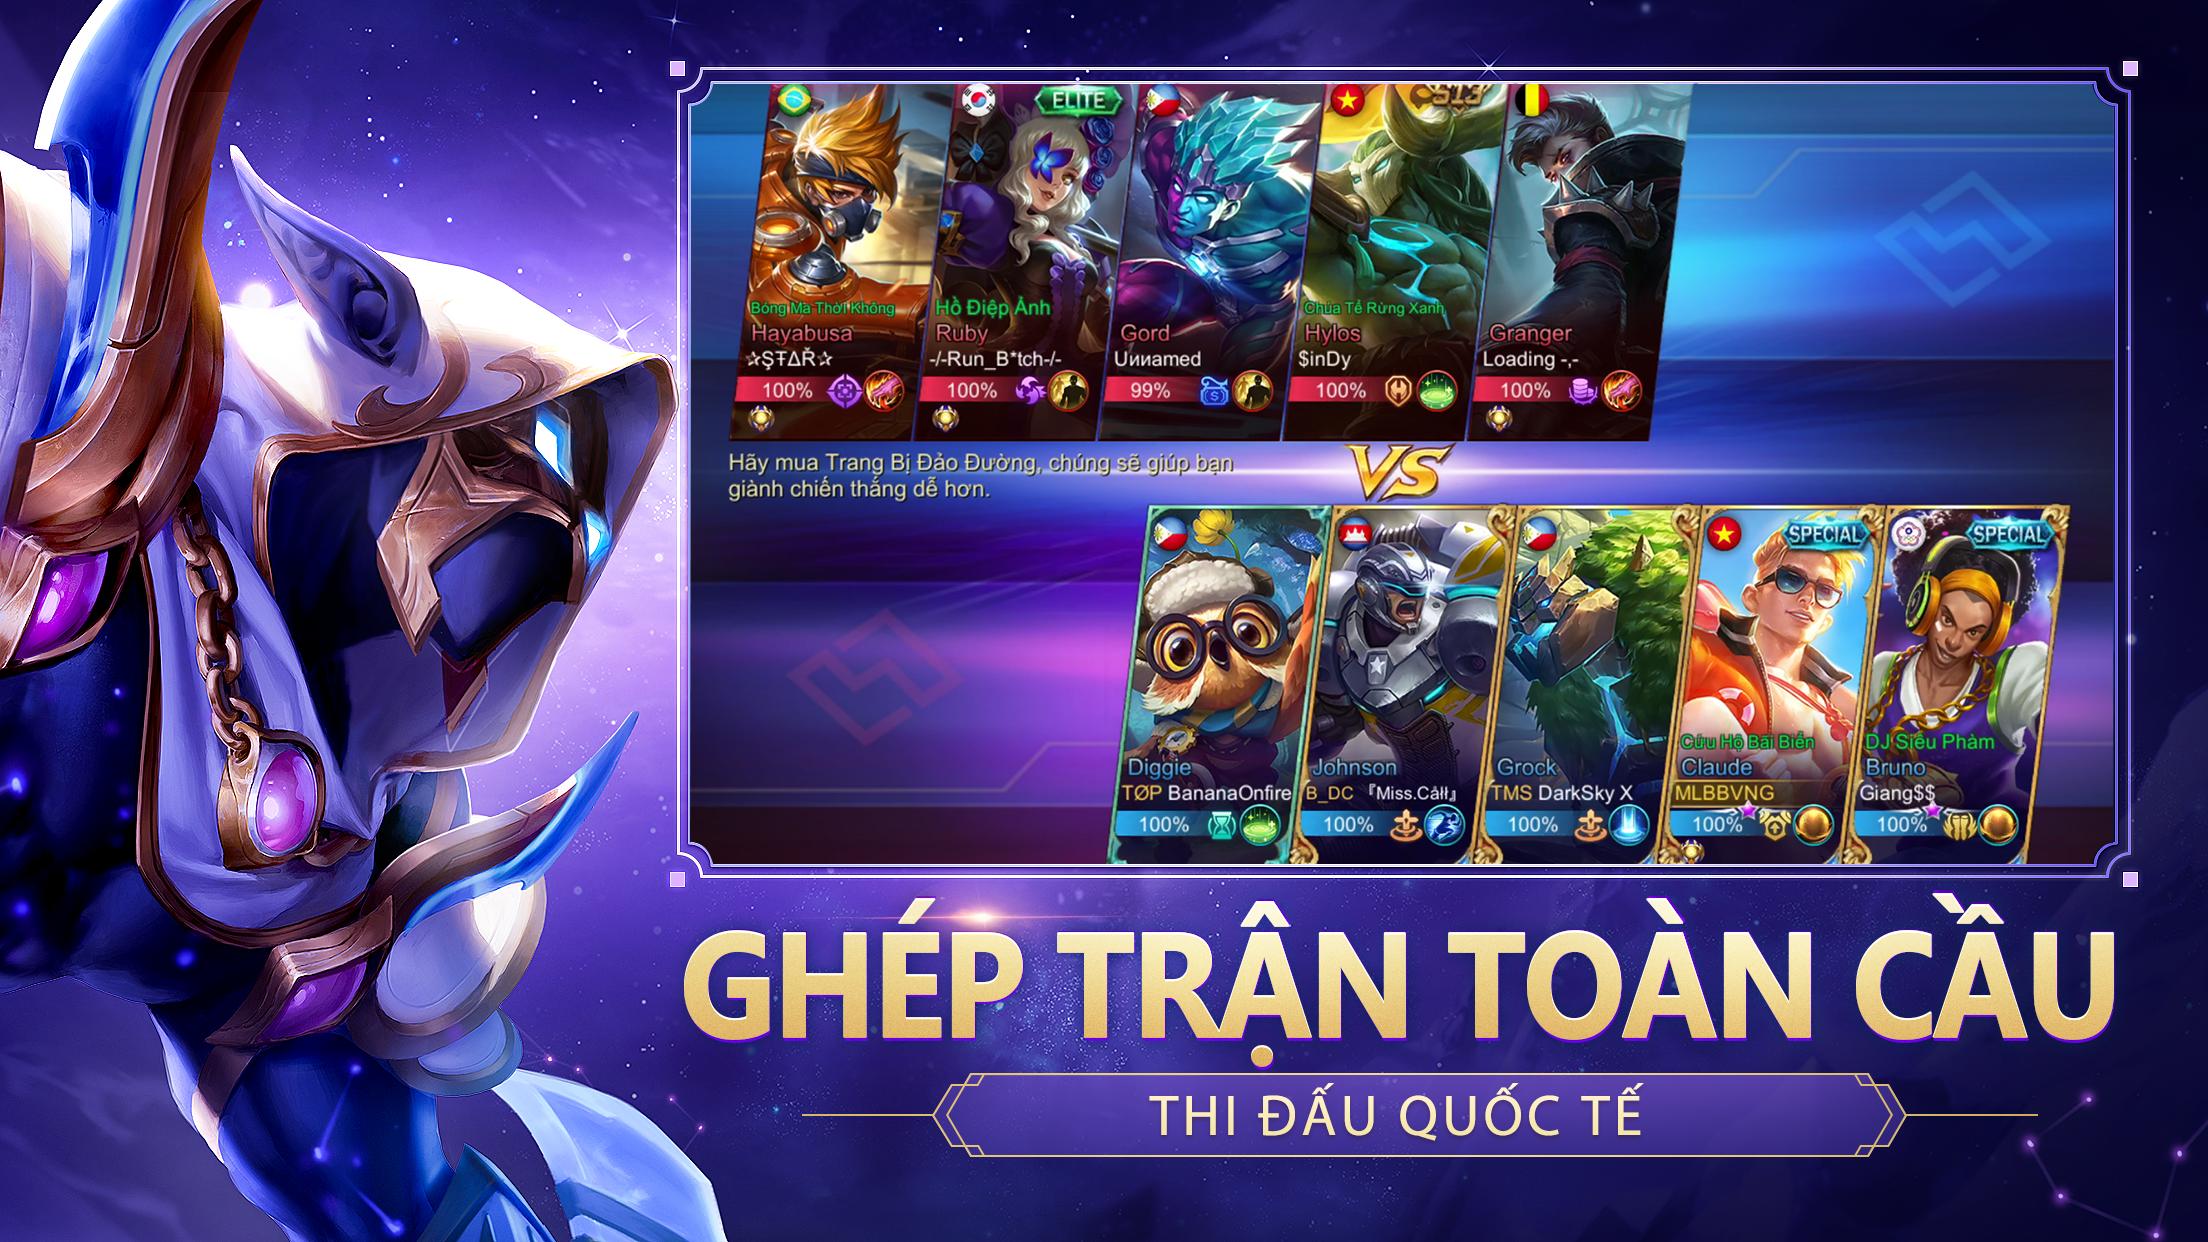 Mobile Legends Bang Bang Vng For Android Apk Download - cach hack robux traan in thoi 2020